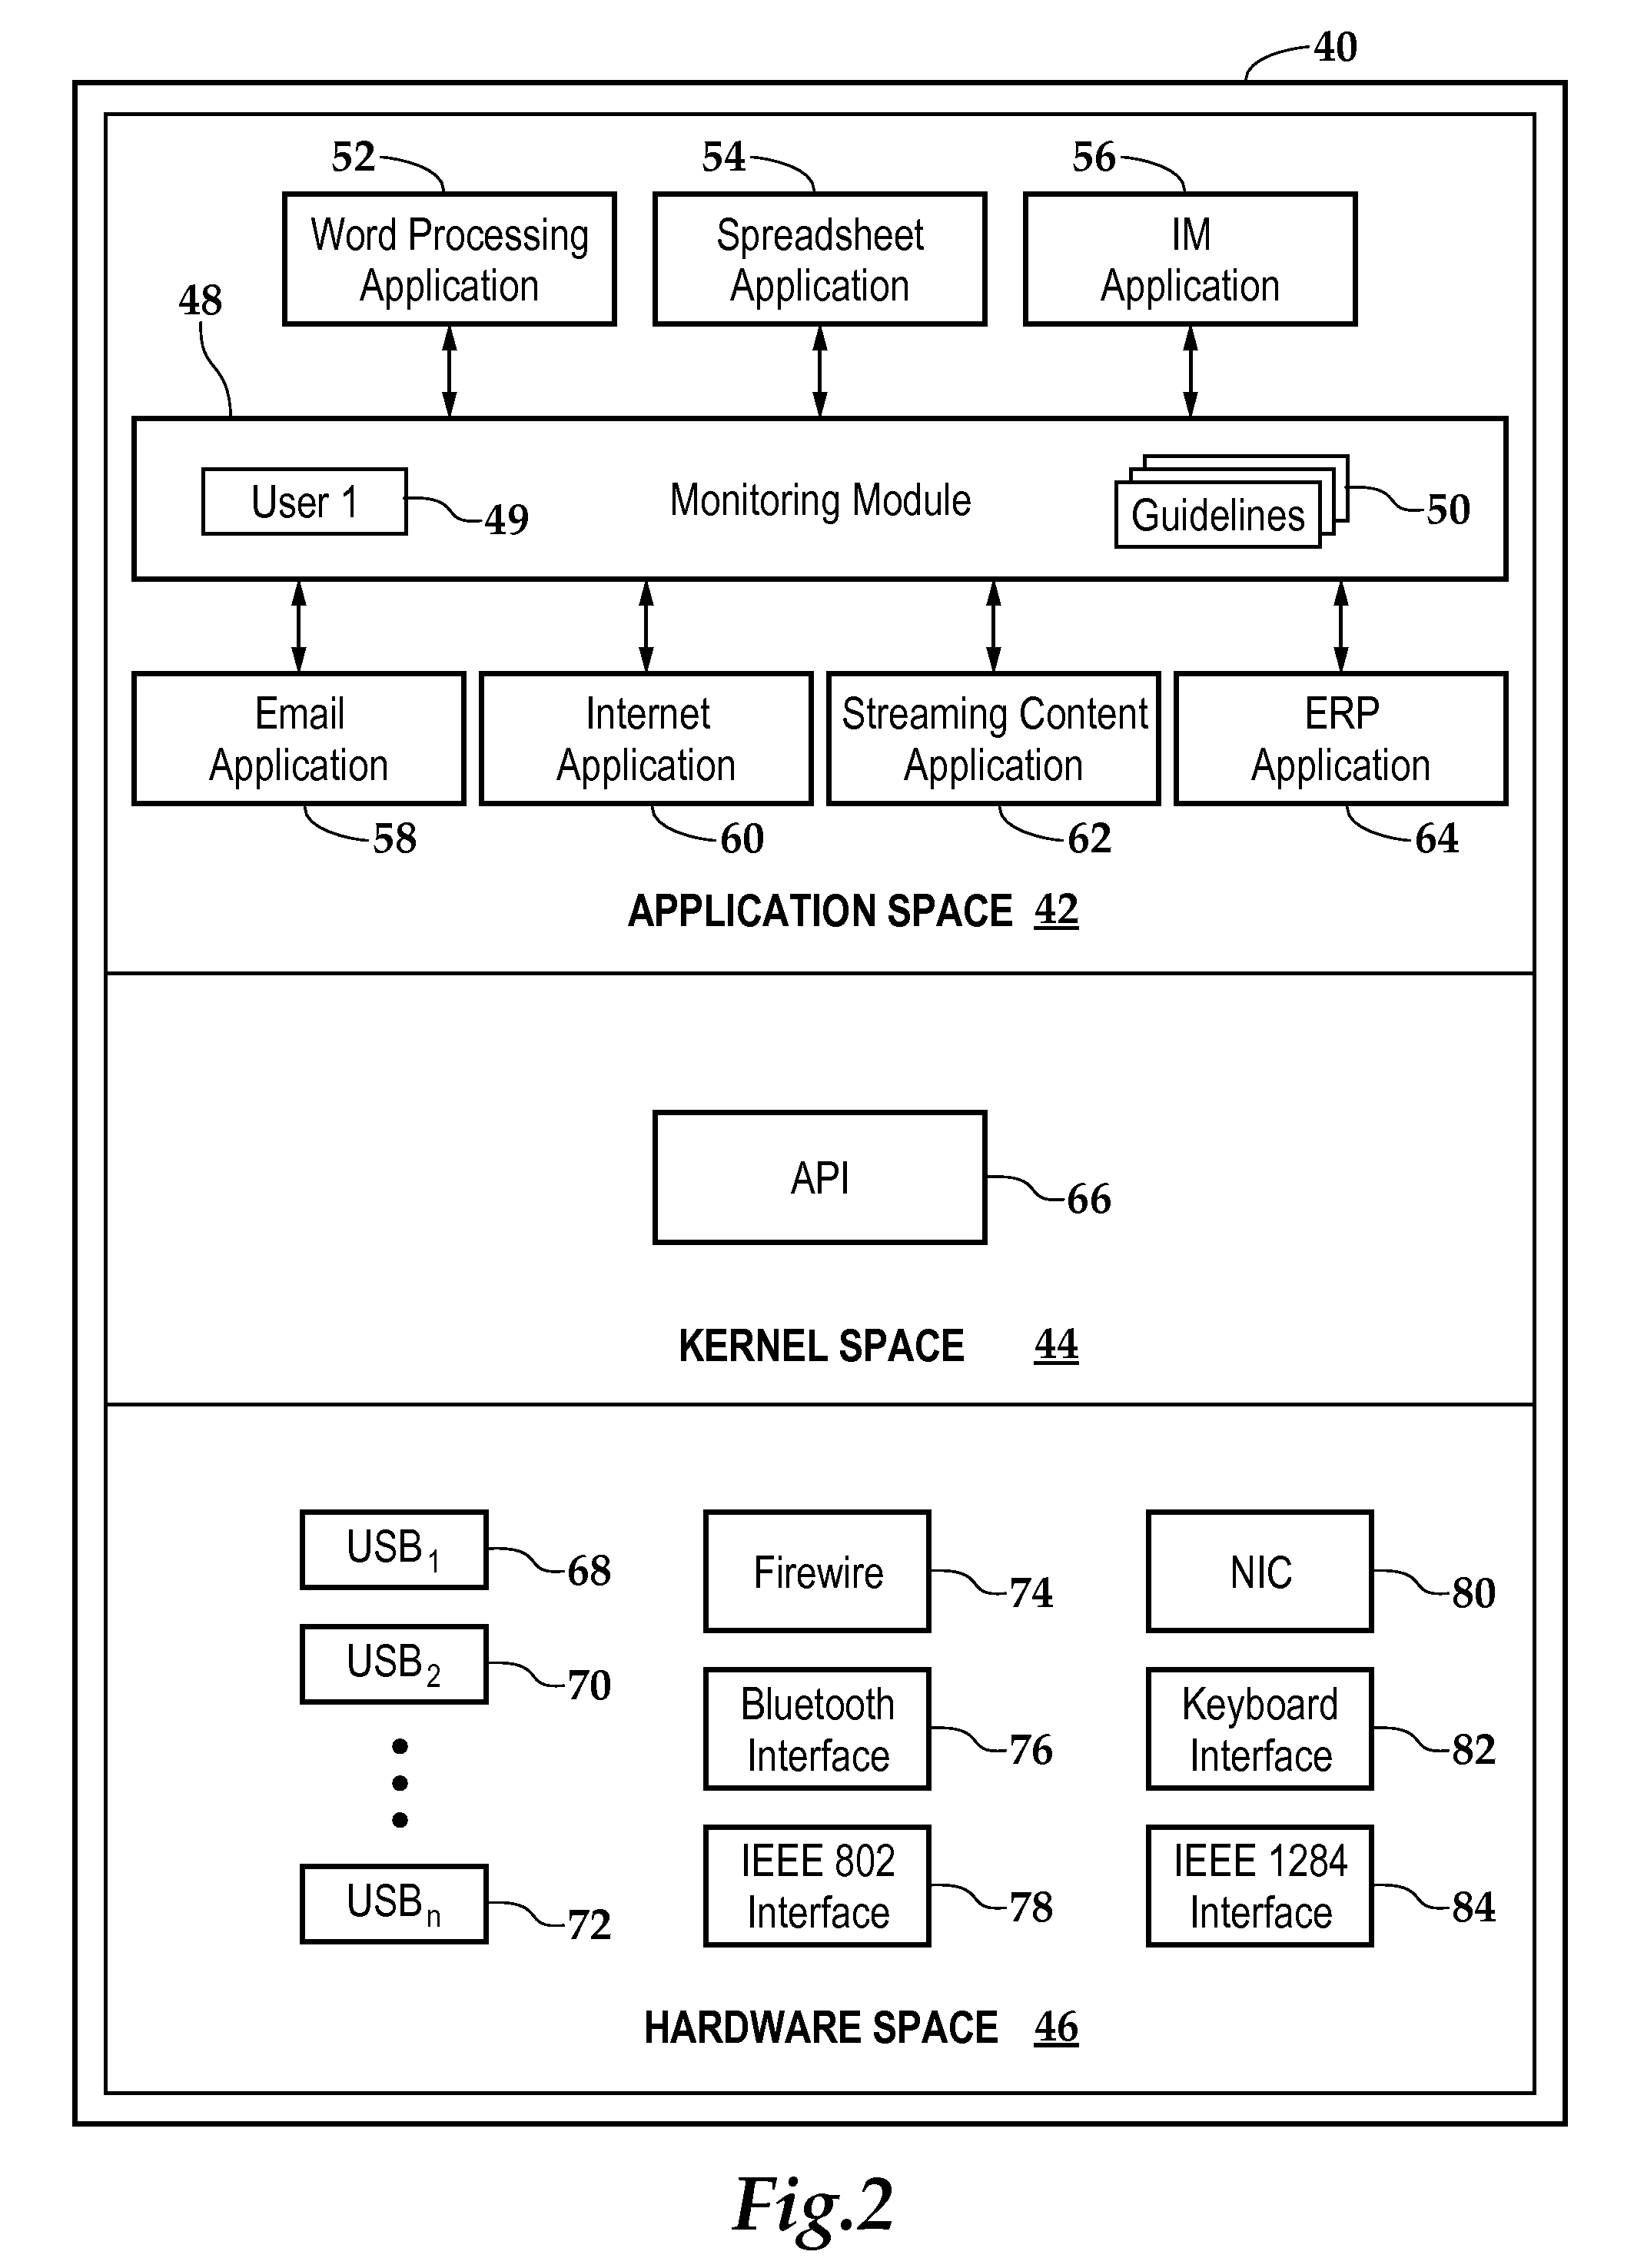 System and Method for User Behavioral Management in a Computing Environment